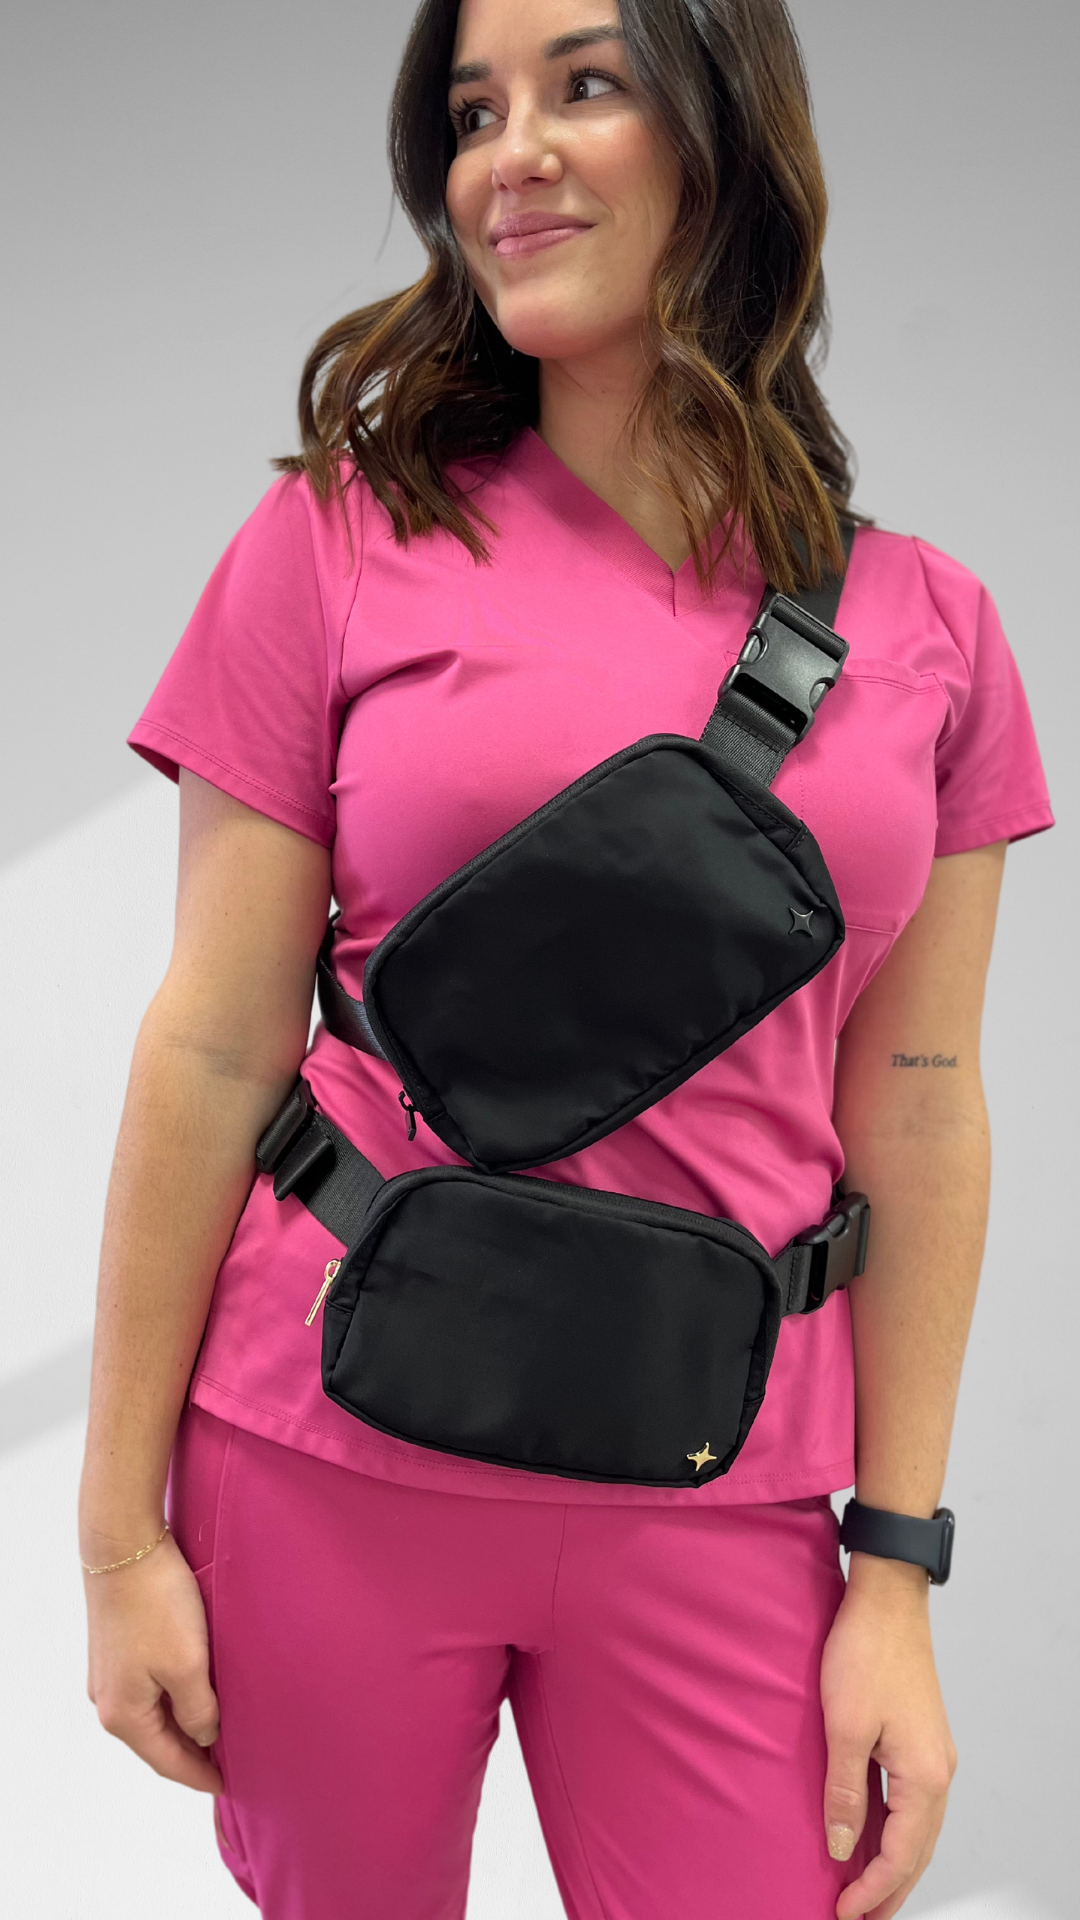 LuMED Belt Bags For Professionals On The Move